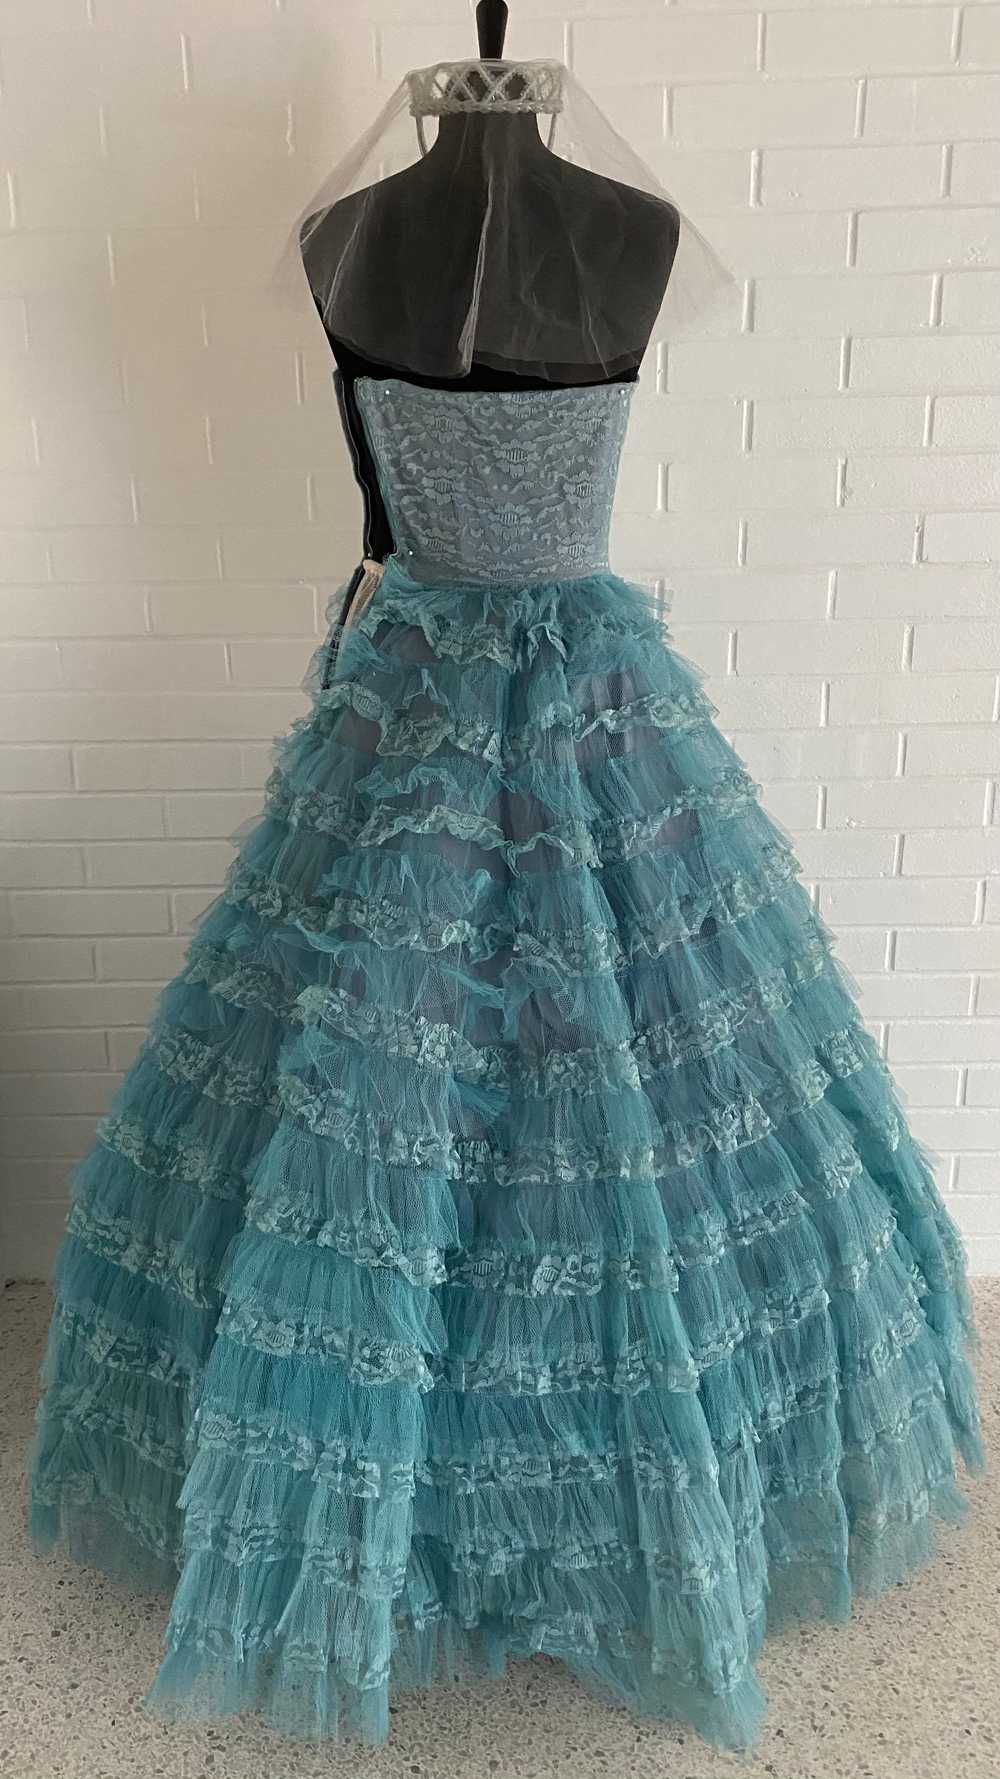 Late 50s/ Early 60s Tulle Strapless Formal Dress - image 11